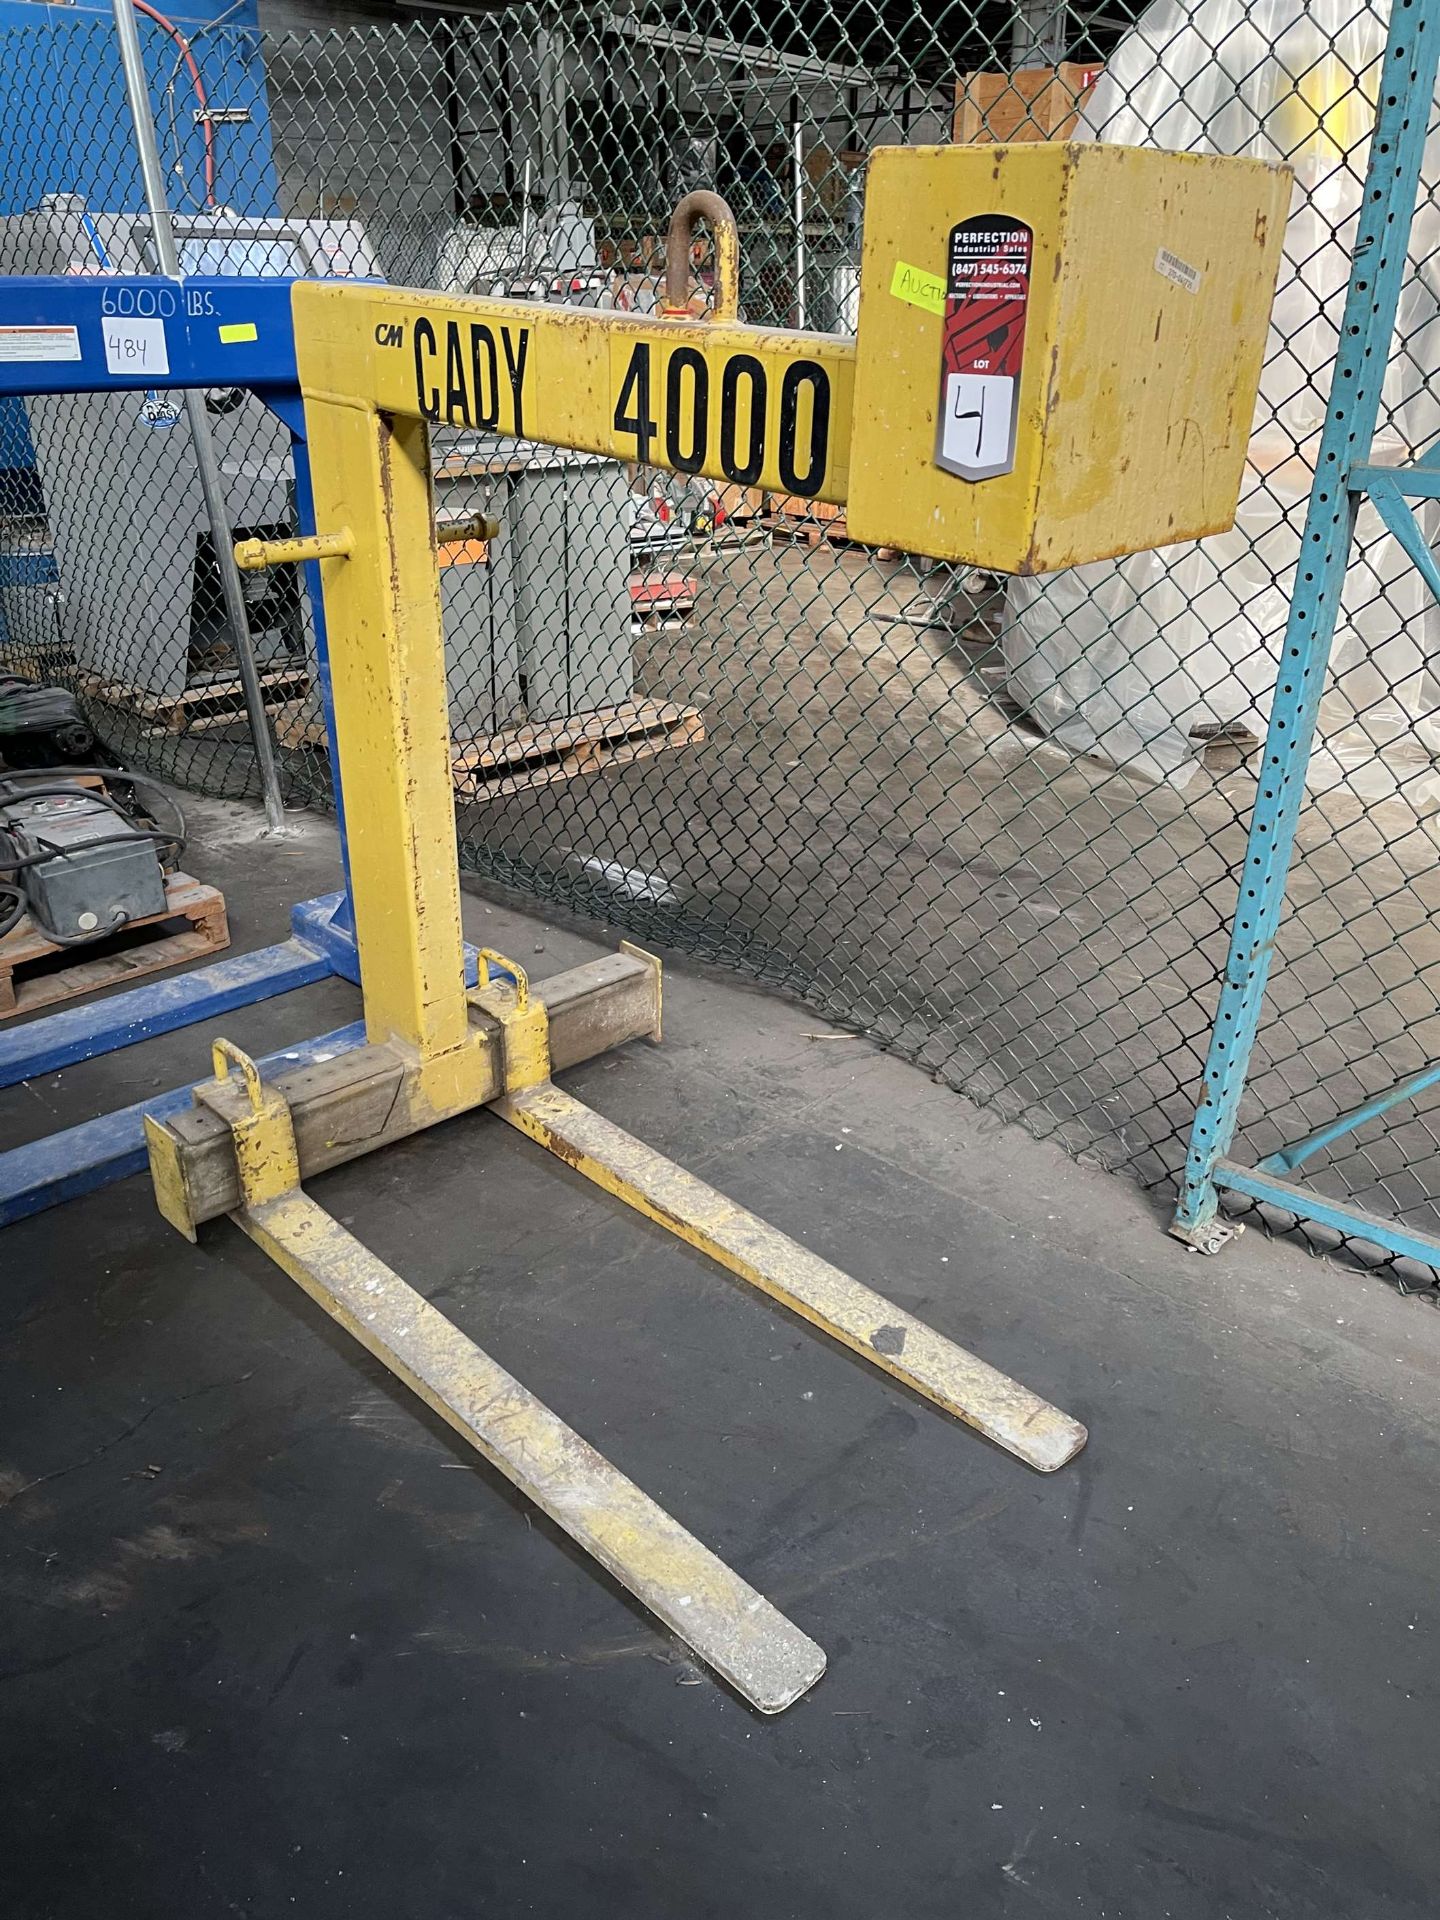 CM Cady Lifter A-448 Pallet Lifter, 48" x 4000 Lb. Capacity - Image 2 of 4